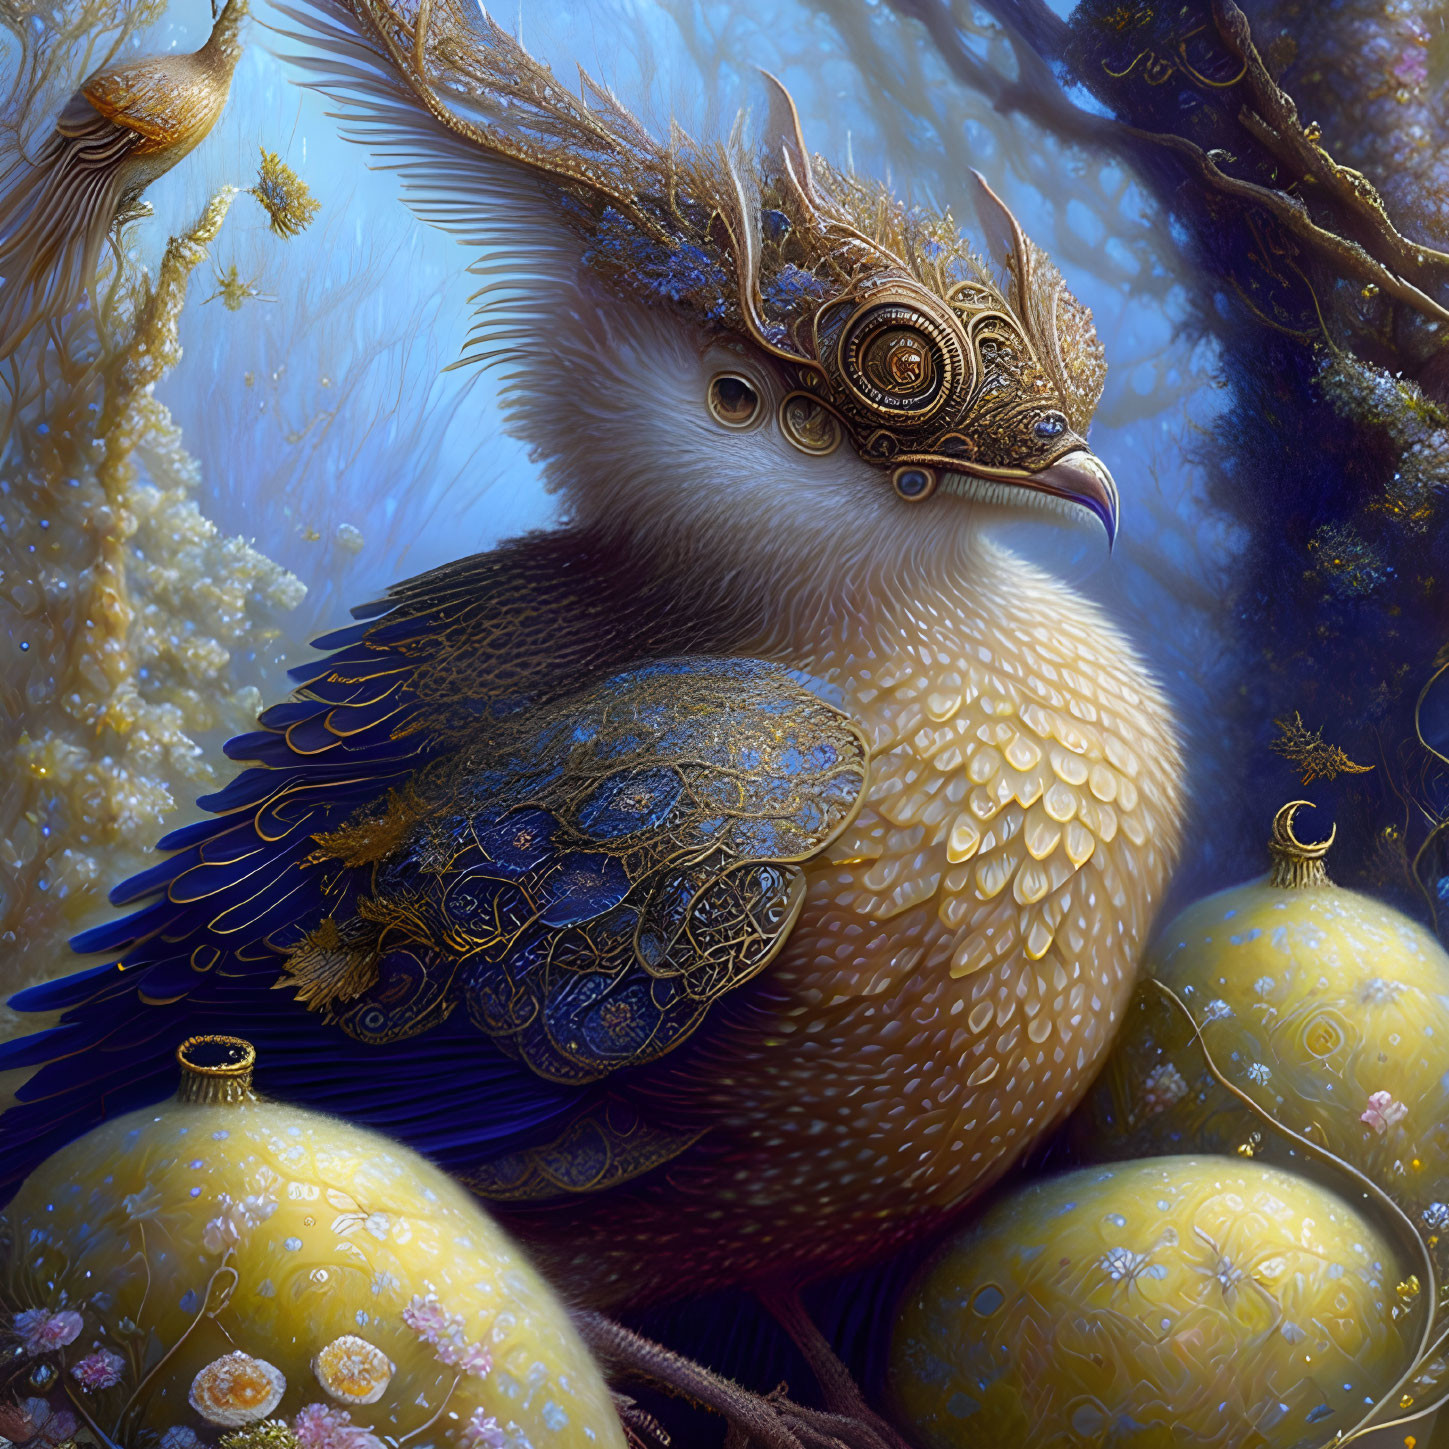 Ornate jeweled bird with mechanical eye in blue and golden fantasy forest